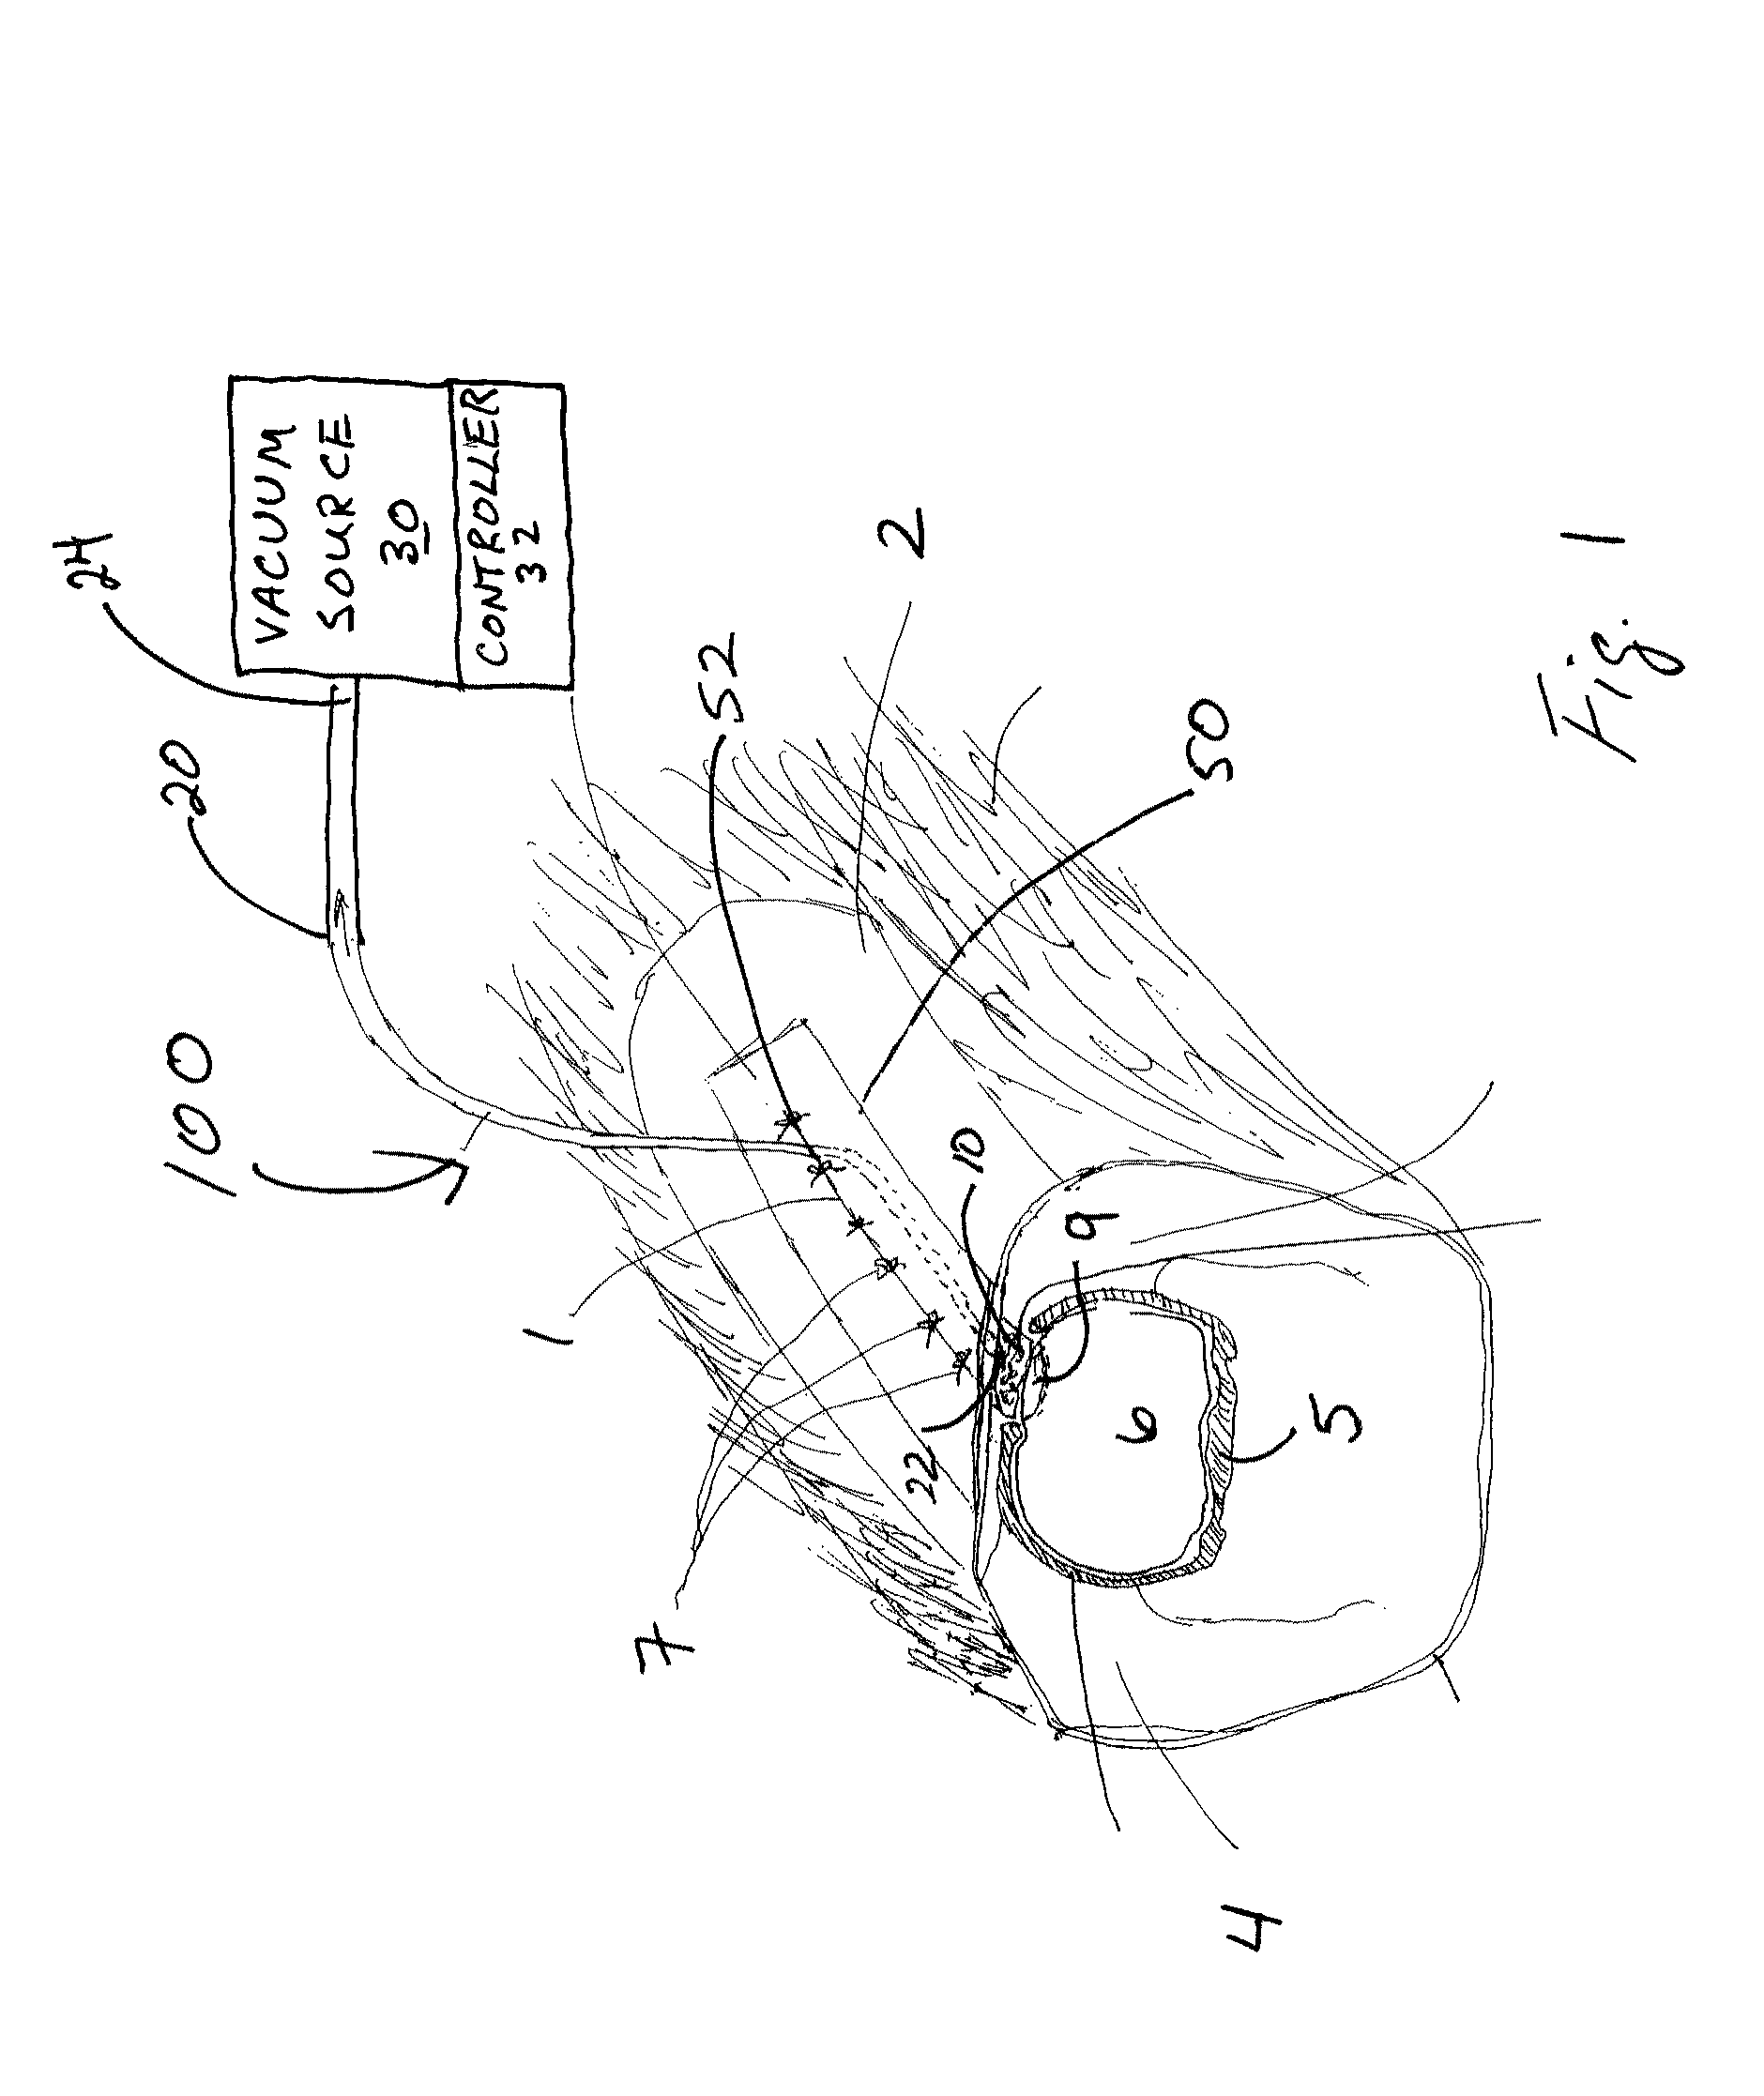 Device and method for treating central nervous system pathology